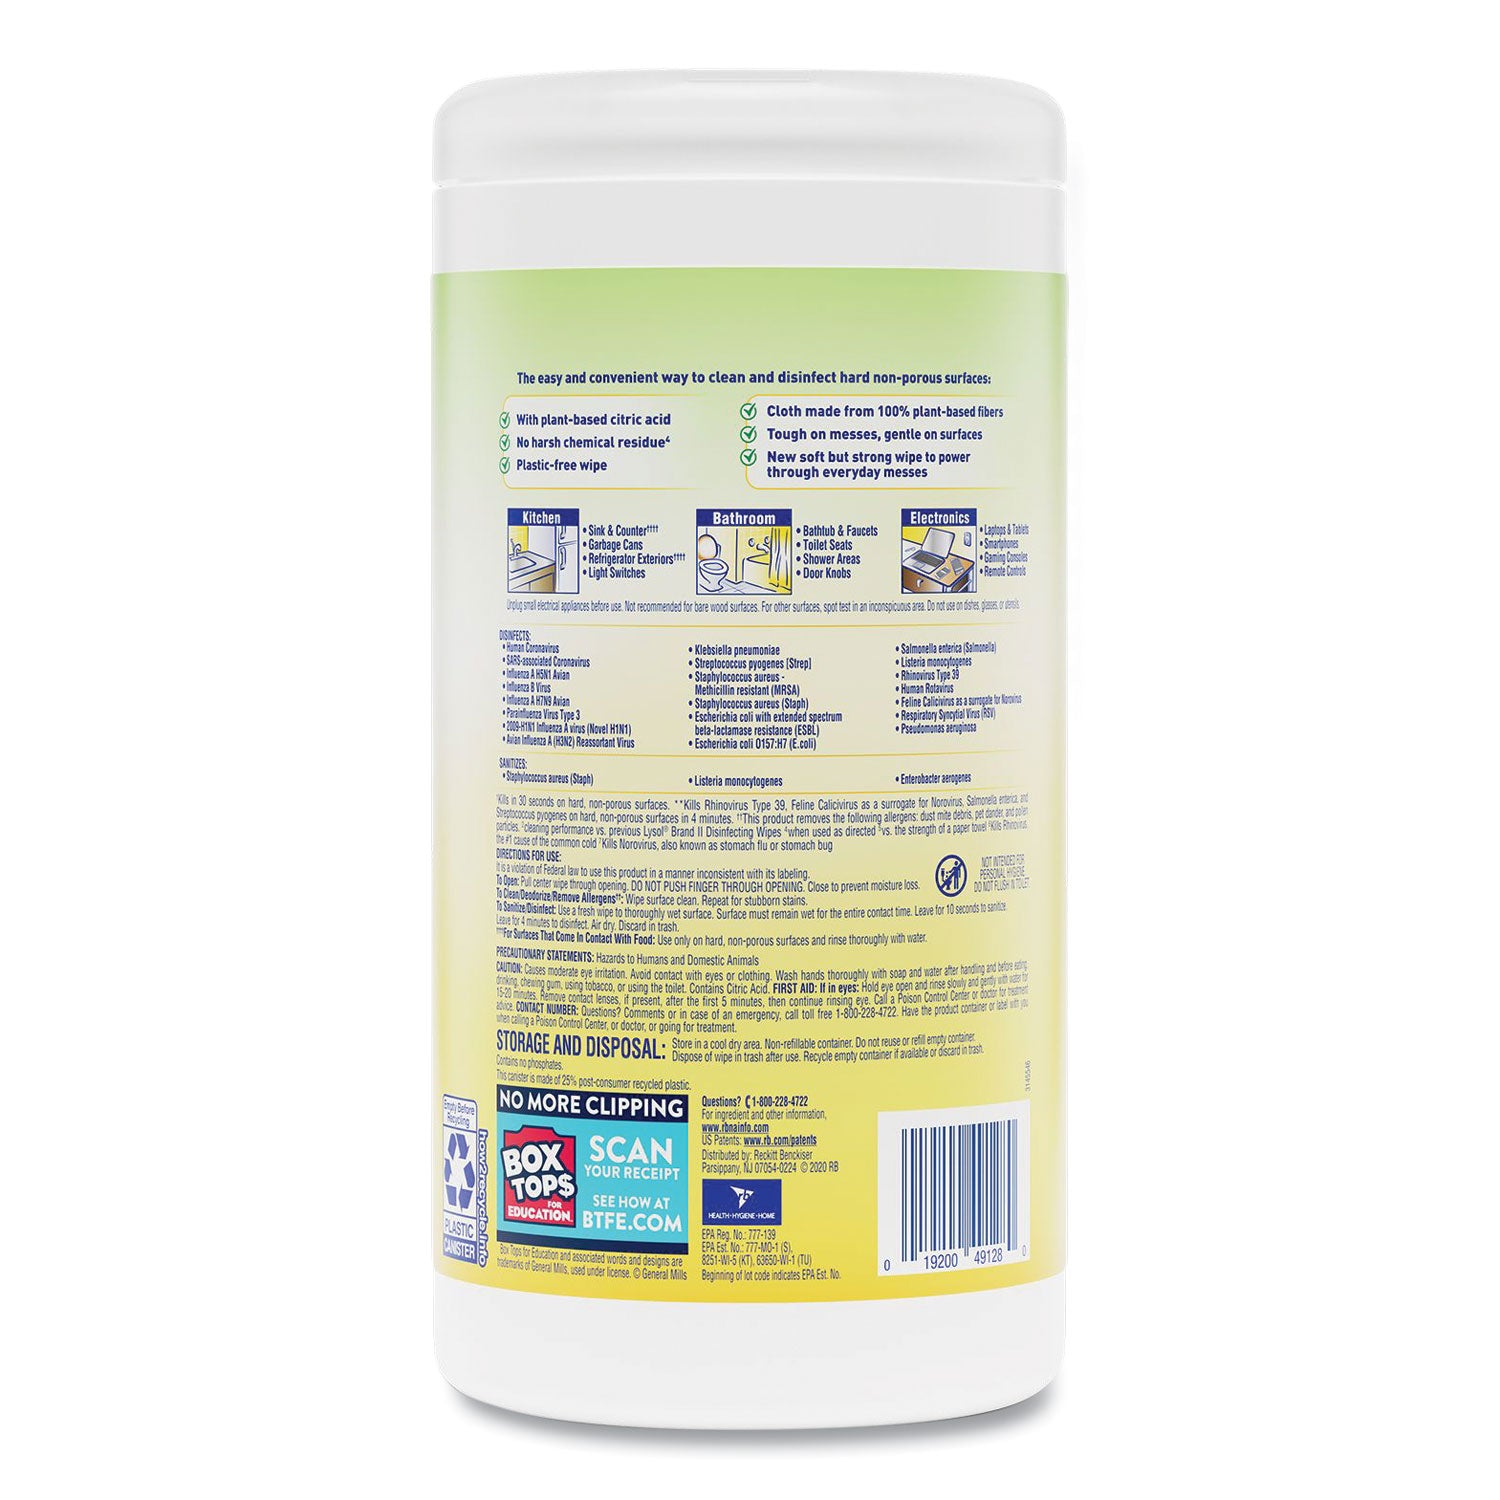 disinfecting-wipes-ii-fresh-citrus-1-ply-7-x-725-white-70-wipes-canister-6-canisters-carton_rac49128ct - 4